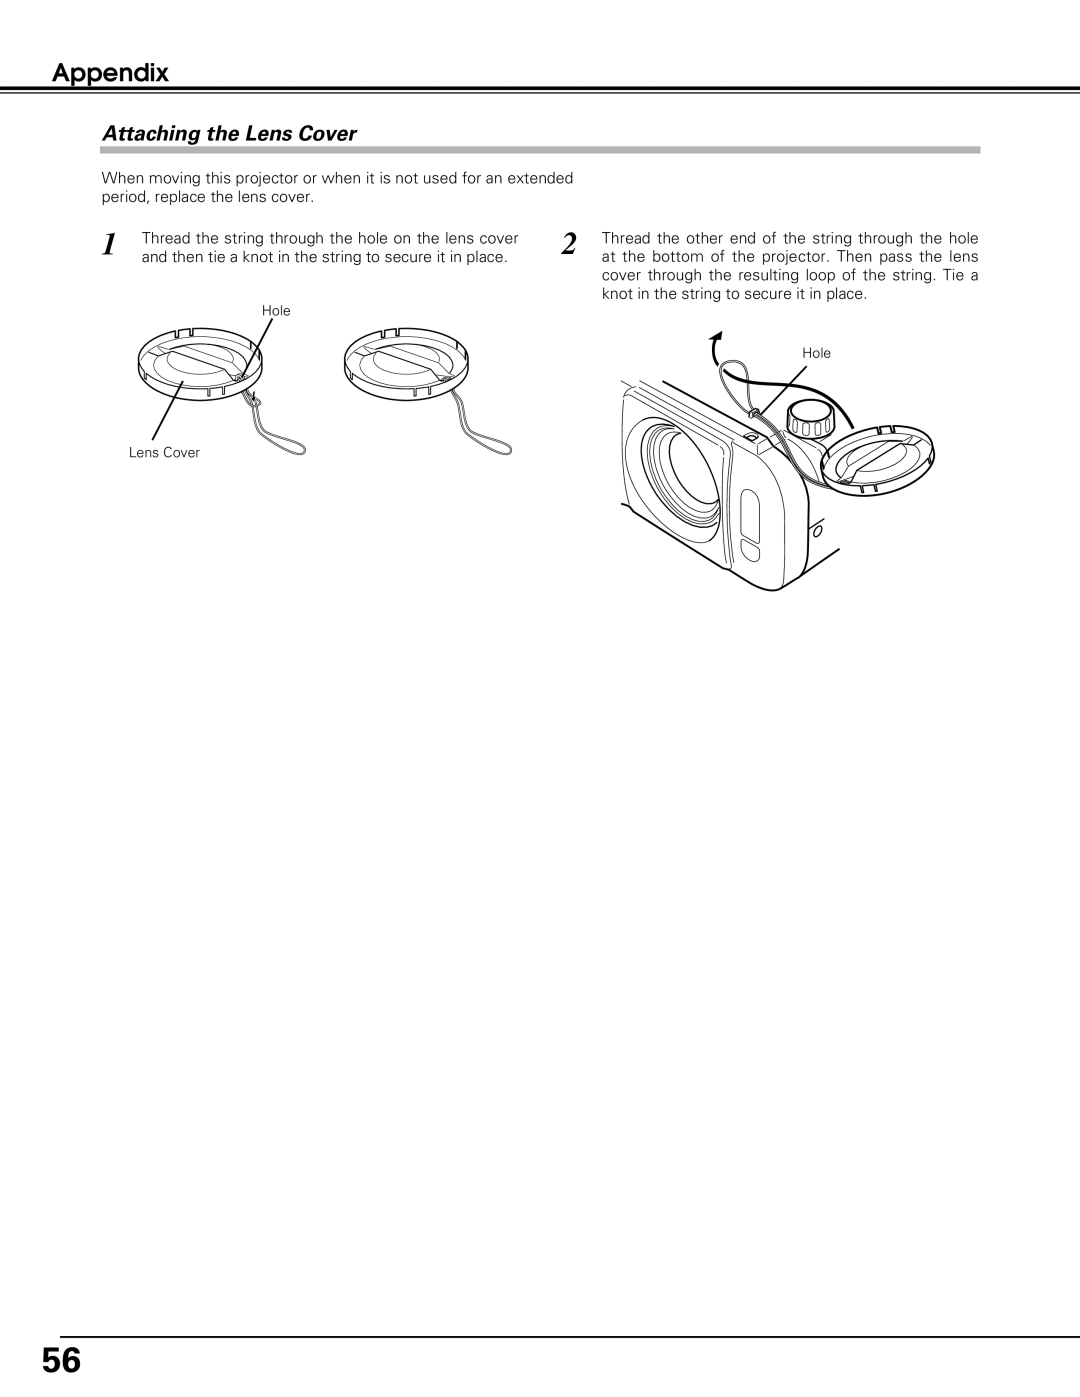 Black Box LC-XE10 instruction manual Attaching the Lens Cover, Appendix 